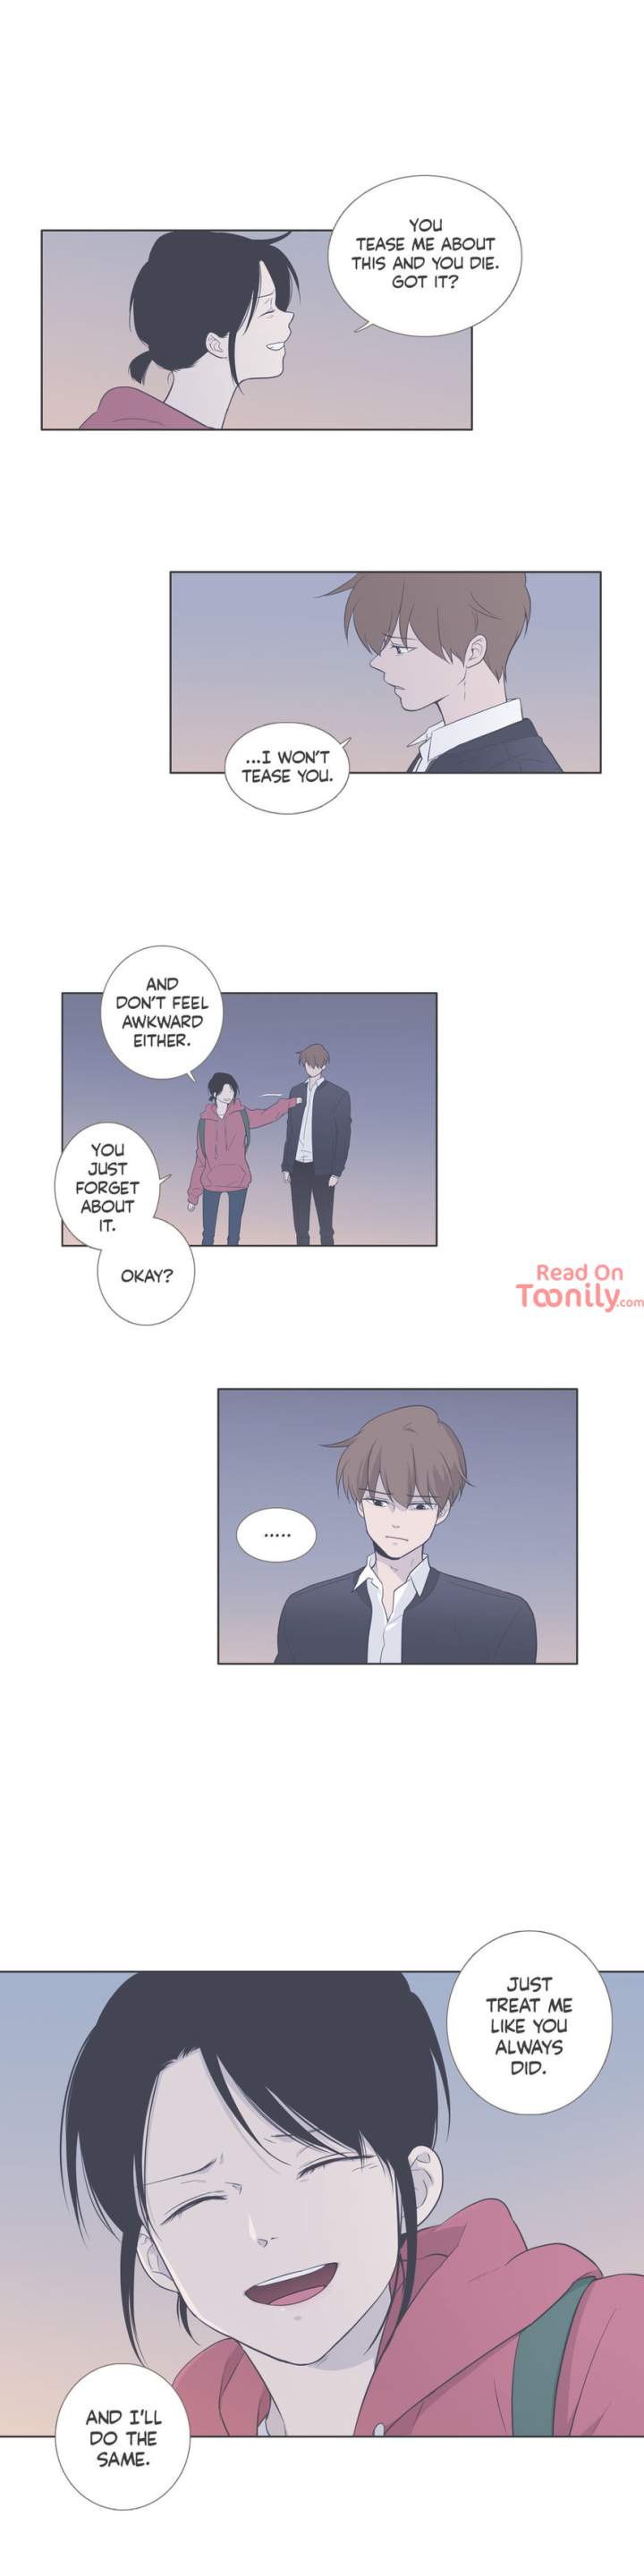 Something About Us - Chapter 64 Page 5